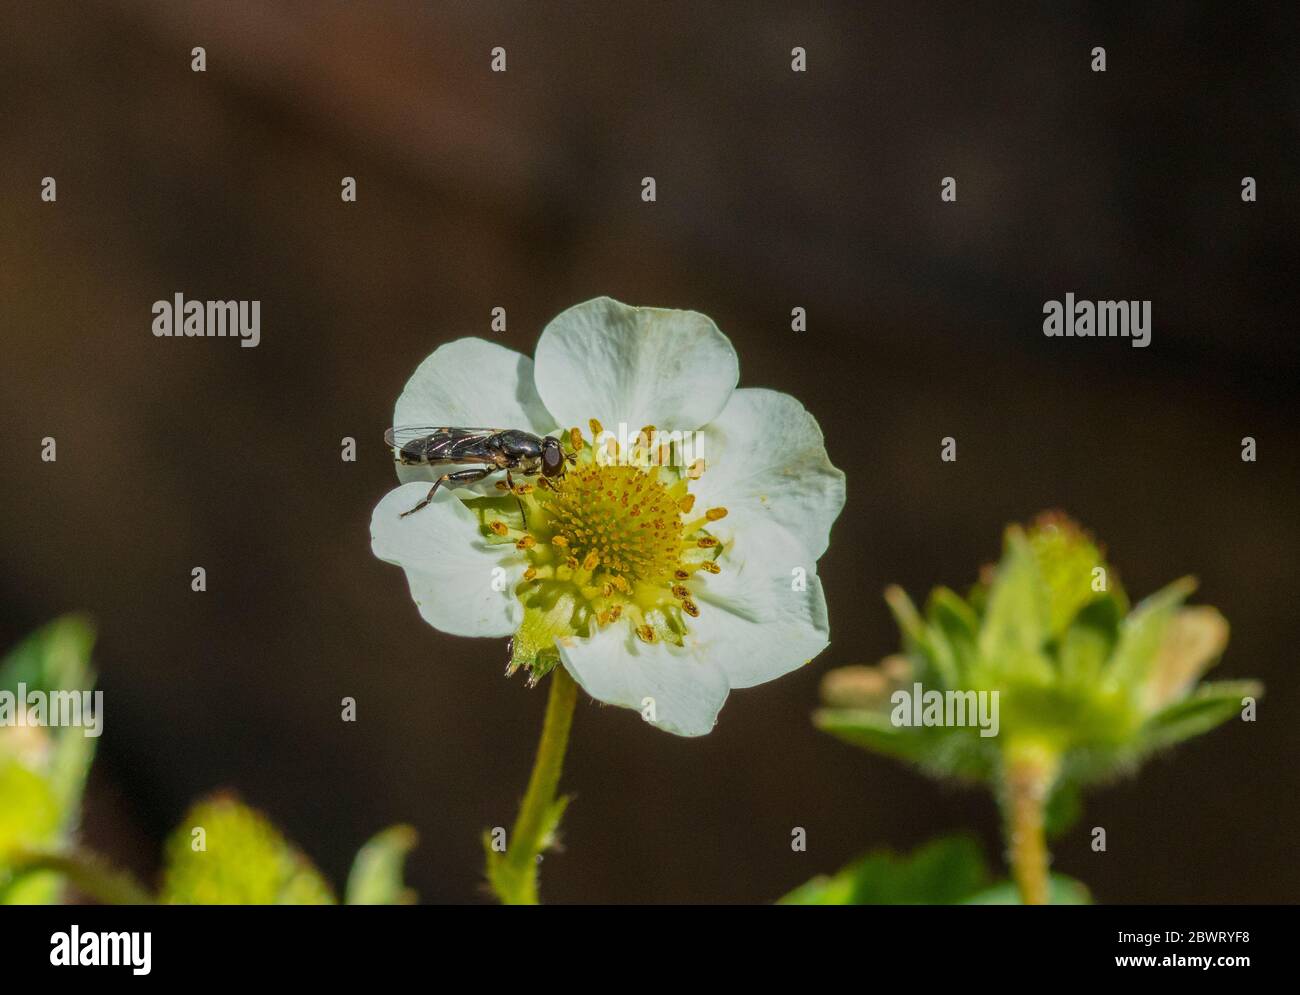 Thick-legged hoverfly on strawberry plant Stock Photo